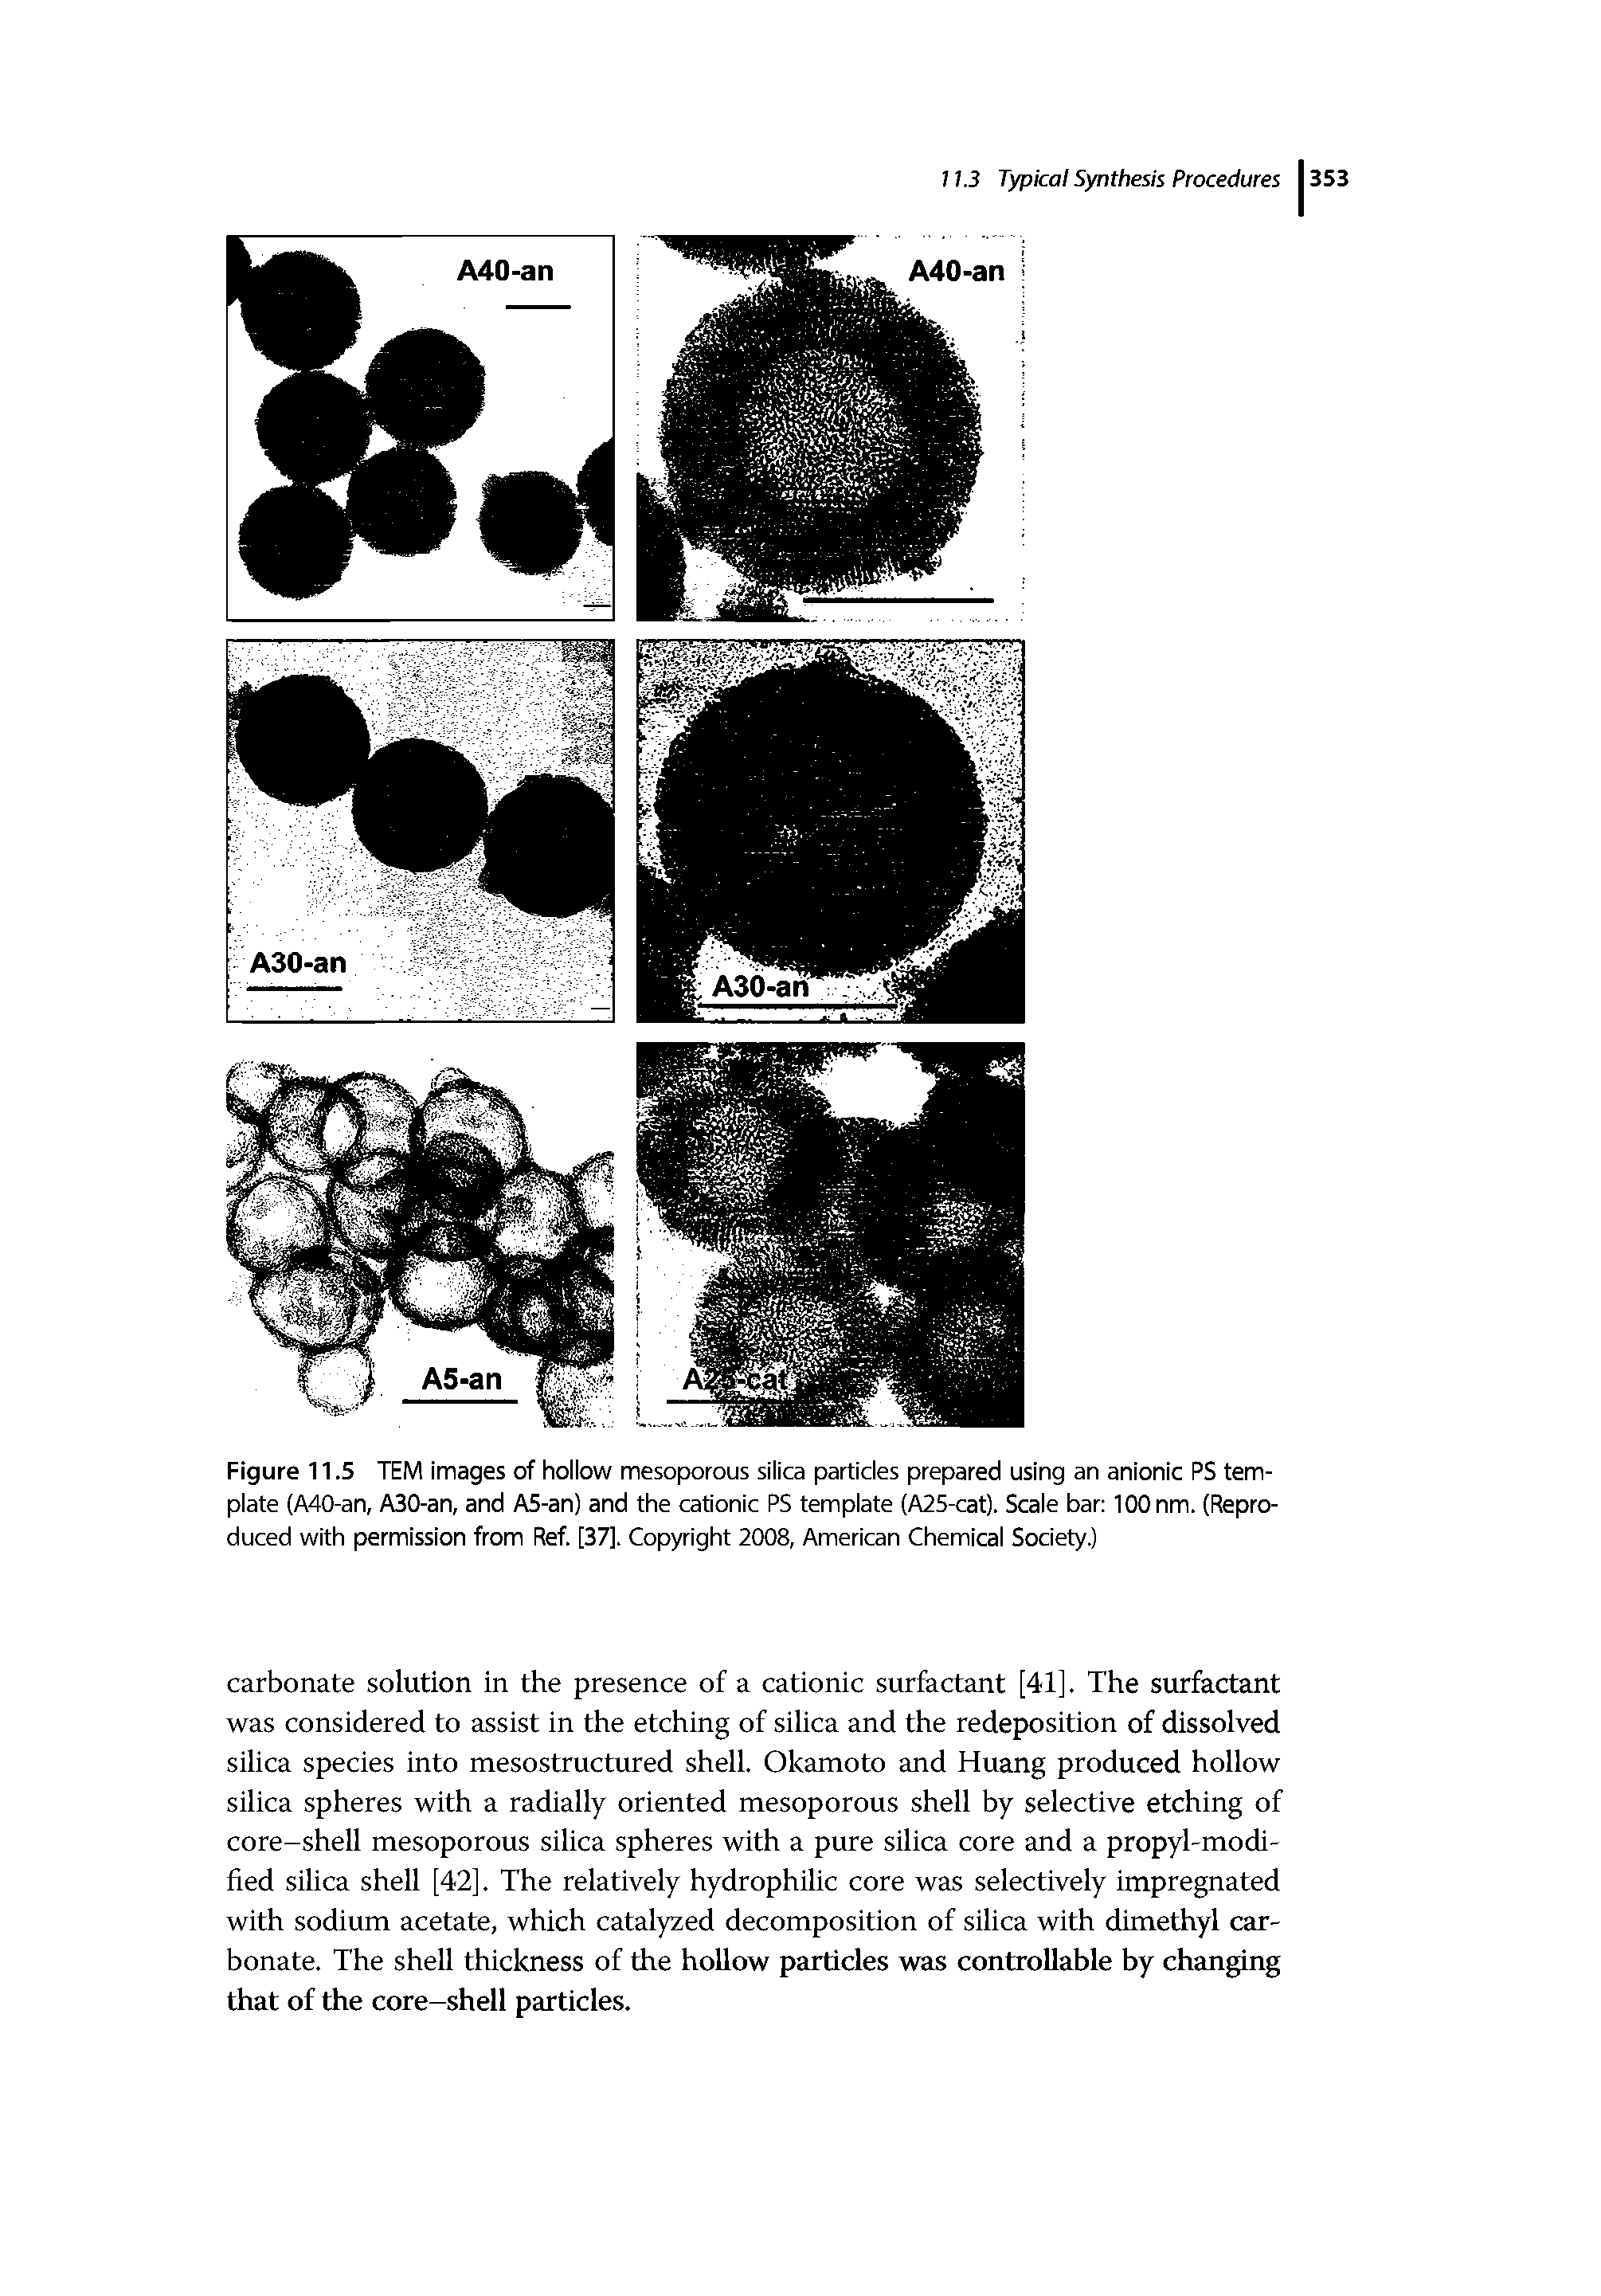 Figure 11.5 TEM images of hollow mesoporous silica particles prepared using an anionic PS template (A40-an, A30-an, and A5-an) and the cationic PS template (A25-cat). Scale bar 100 nm. (Reproduced with permission from Ref. [37], Copyright 2008, American Chemical Society.)...